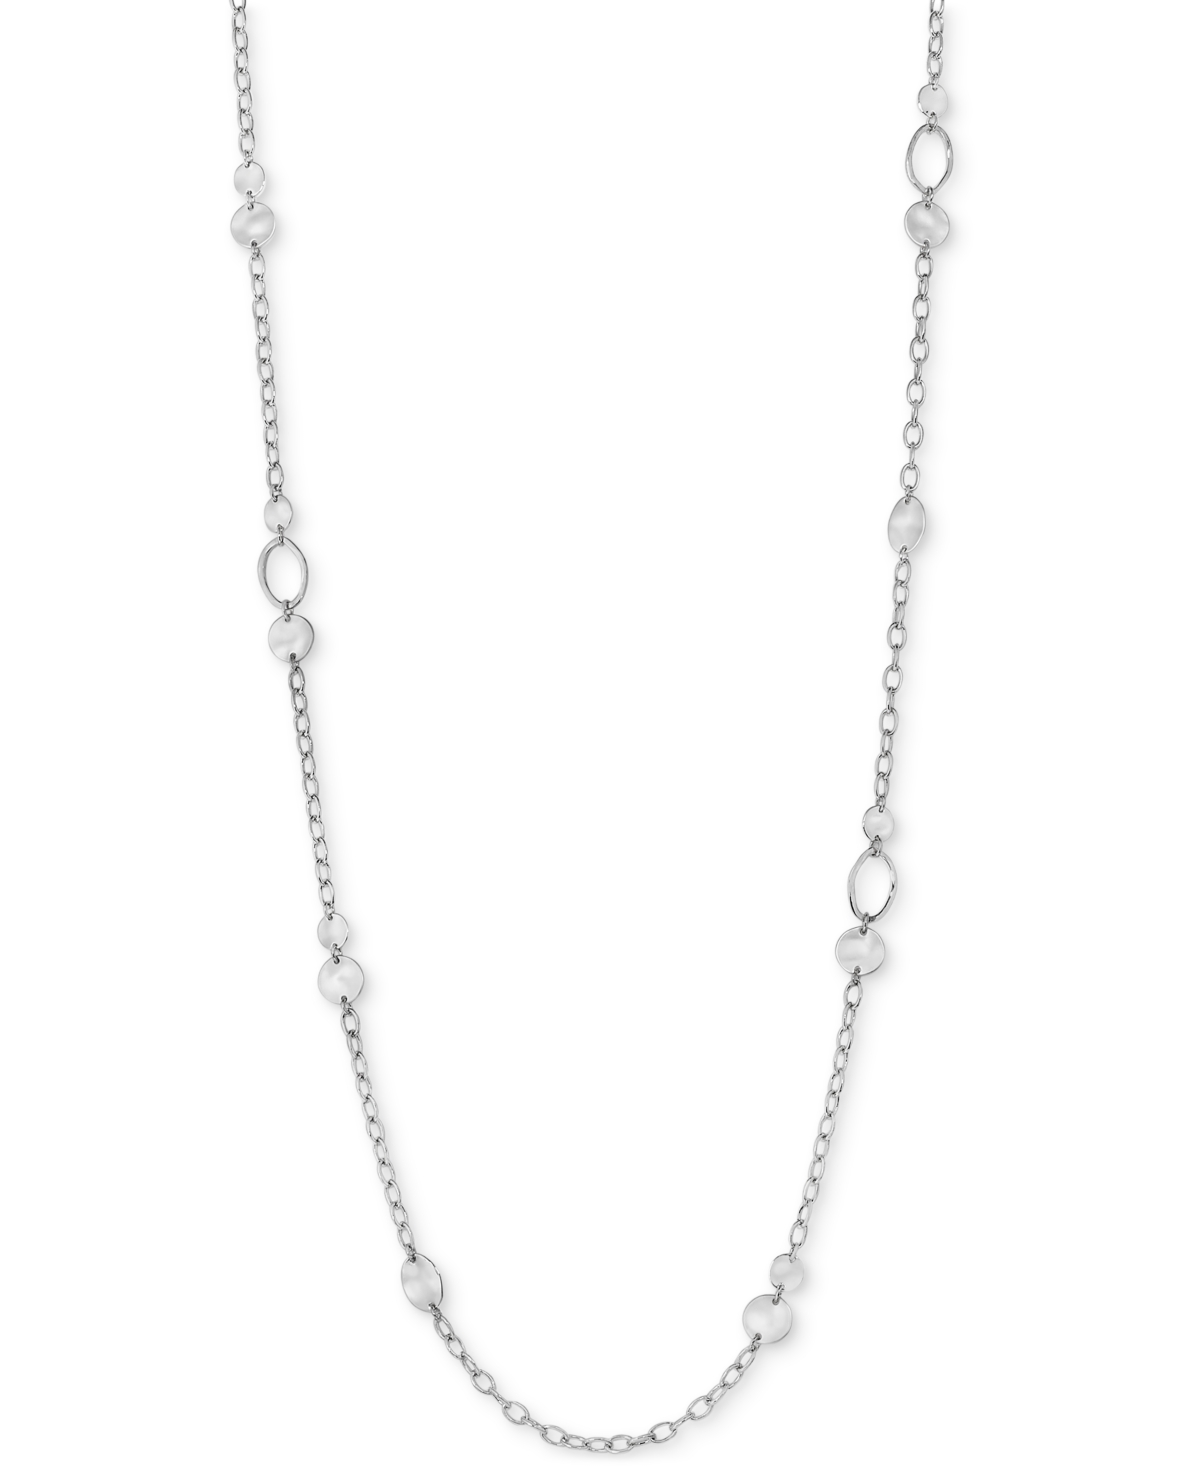 Mixed-Metal Beaded Long Necklace, 42-1/2" + 3" extender, Created for Macy's - Silver